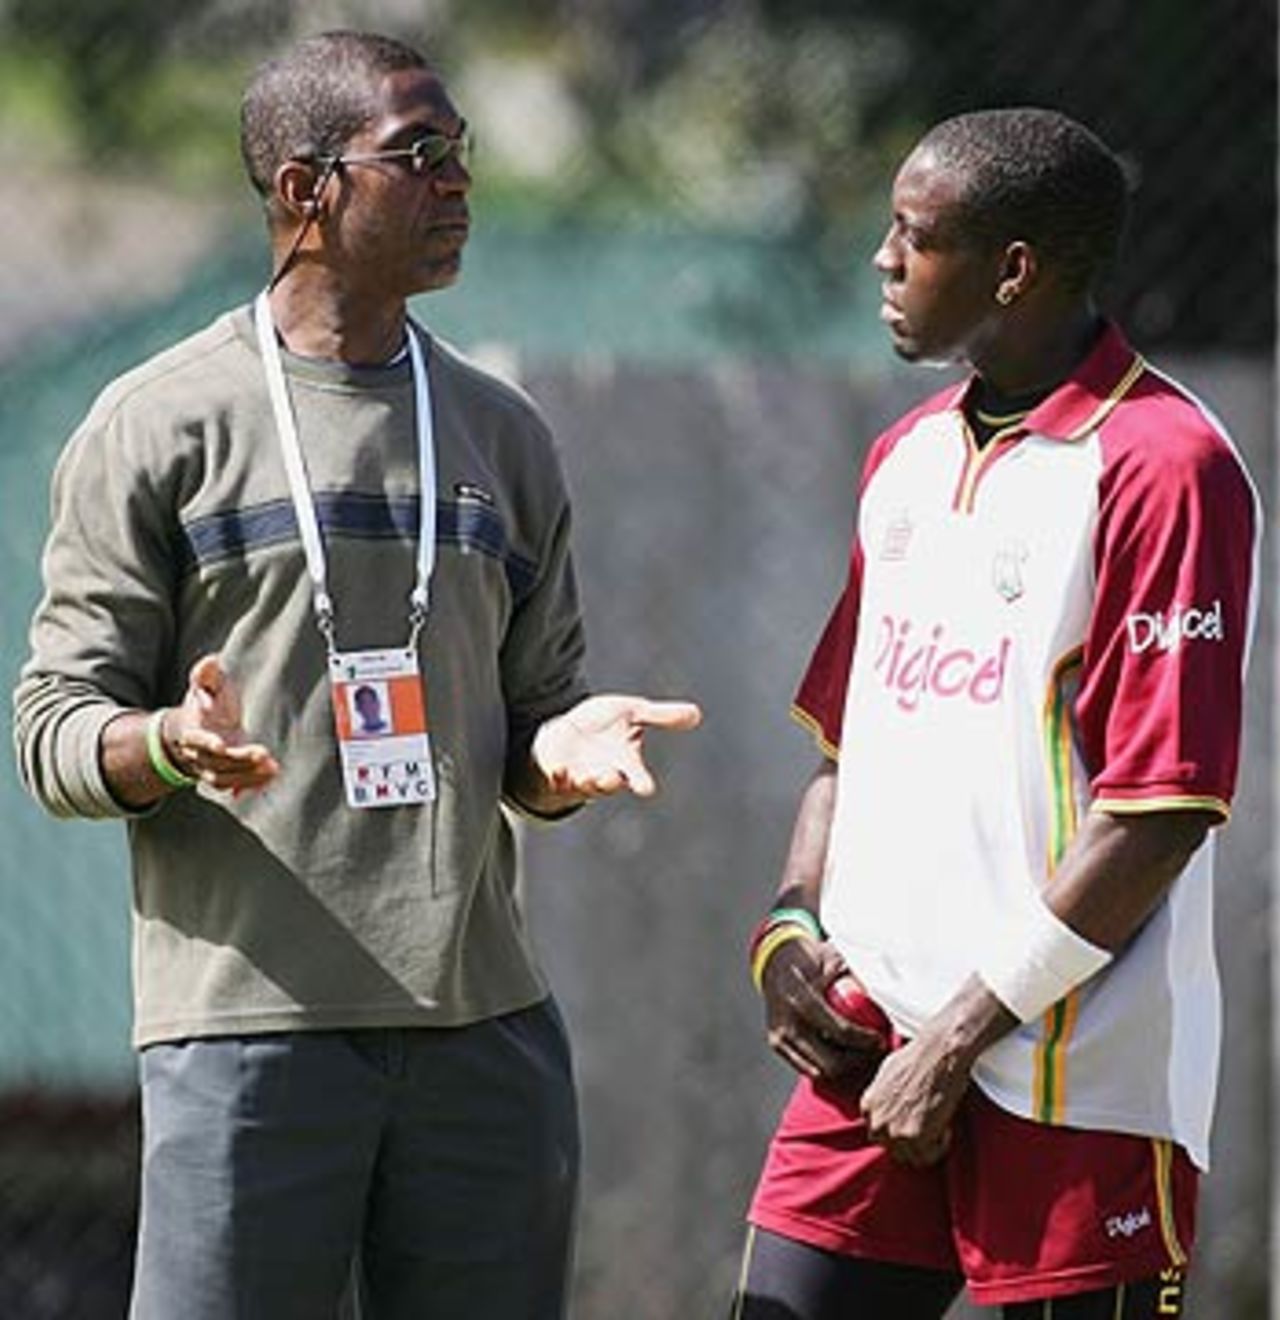 "Now back in my day..." Michael Holding chats with Jermaine Lawson during a practice session, Bellerive Oval, Hobart, November 16, 2005